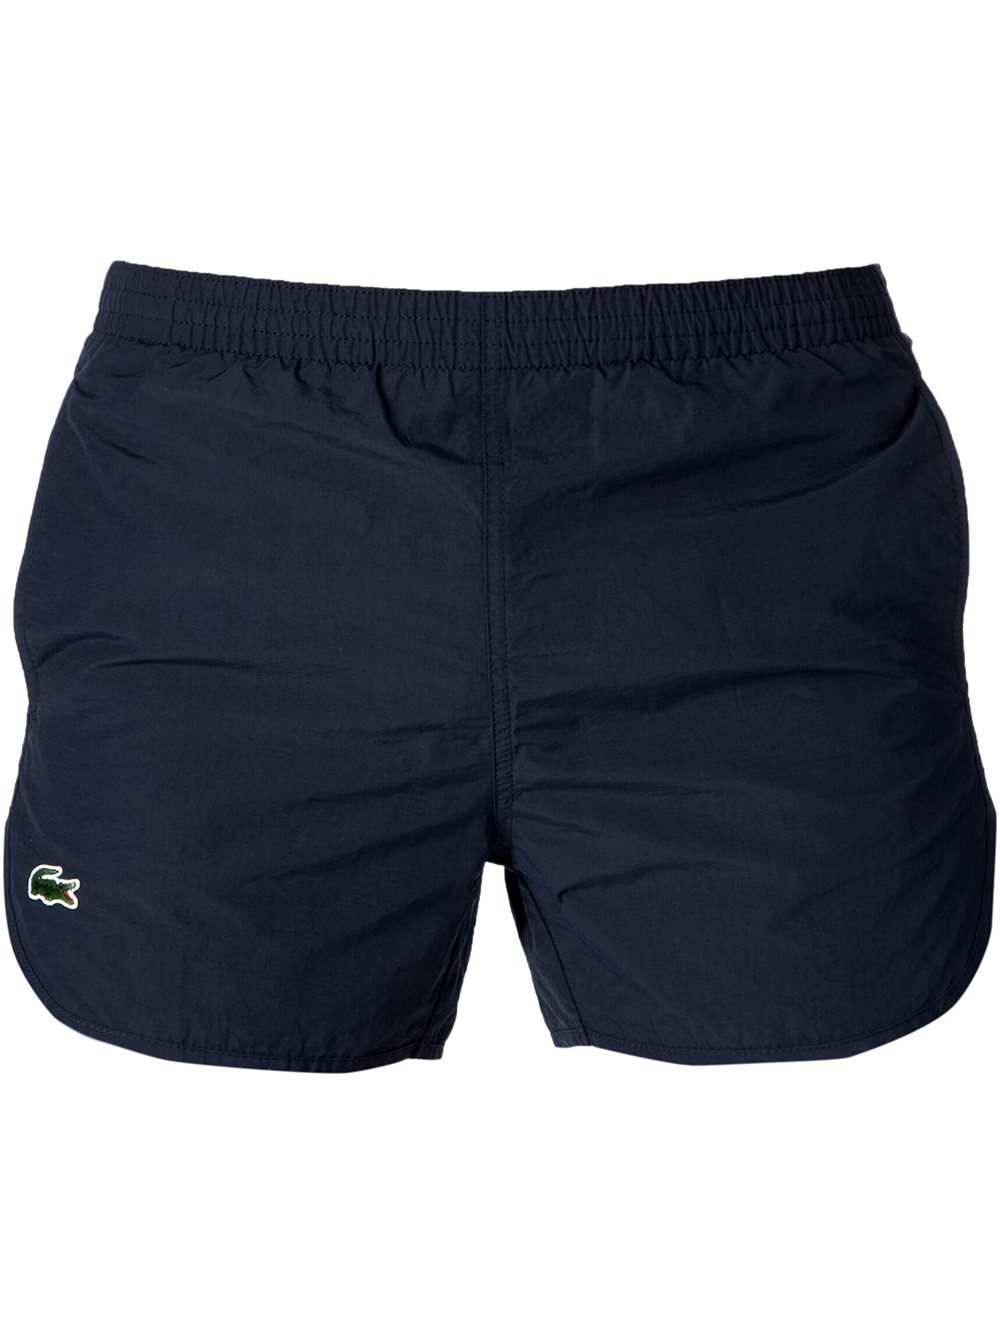 Lyst - Lacoste L!Ive Classic Swim Shorts in Blue for Men